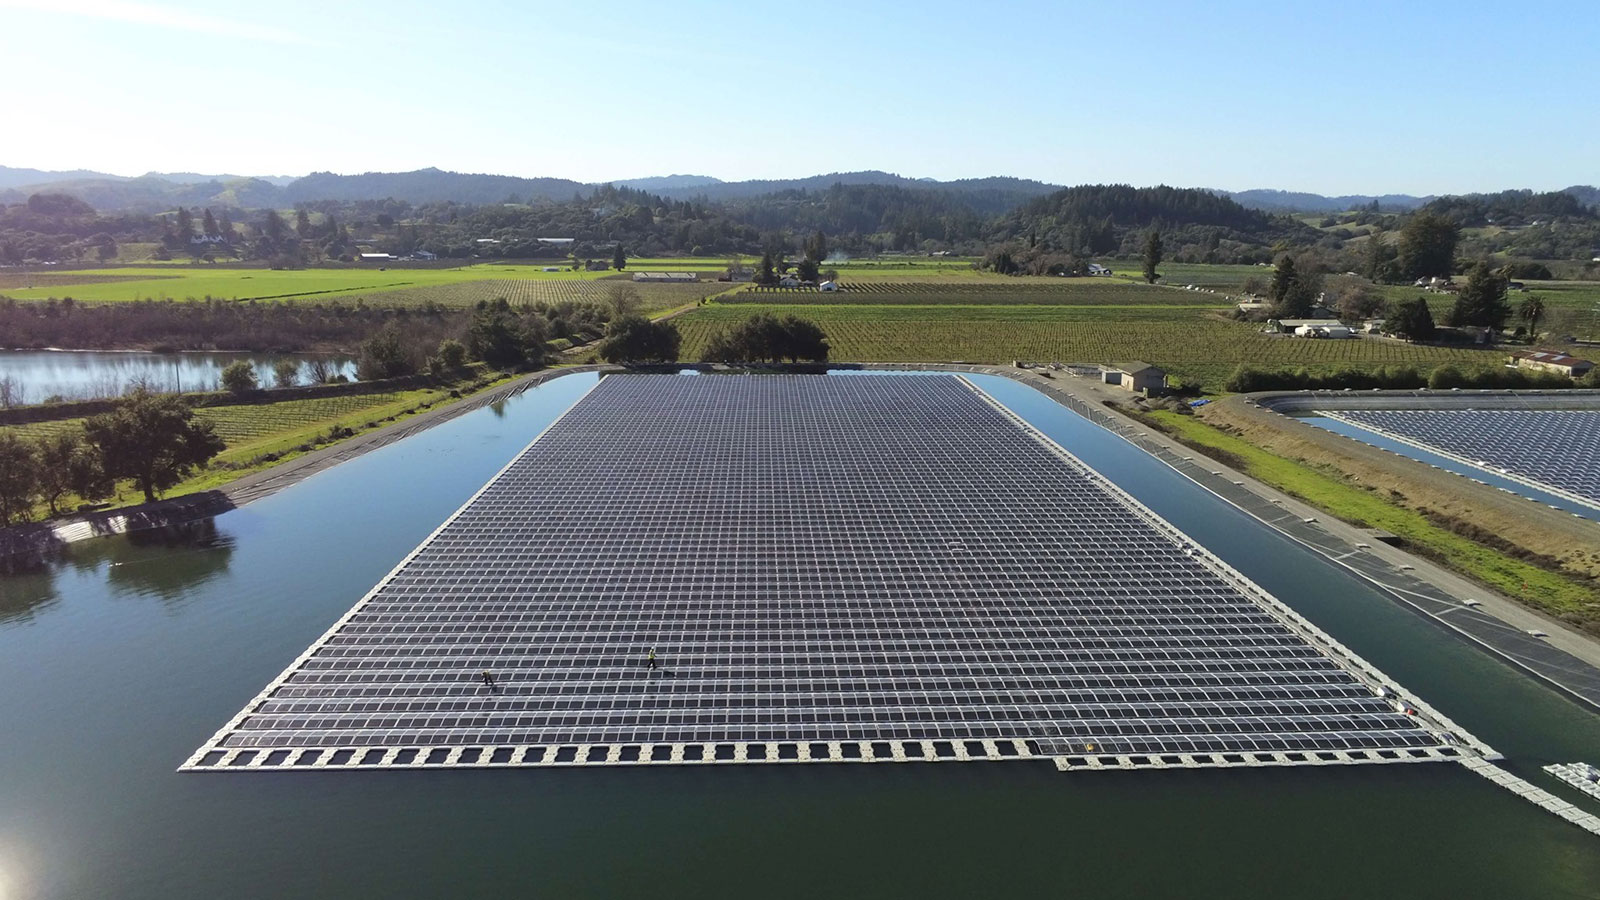 Aerial view of solar panels on a body of water